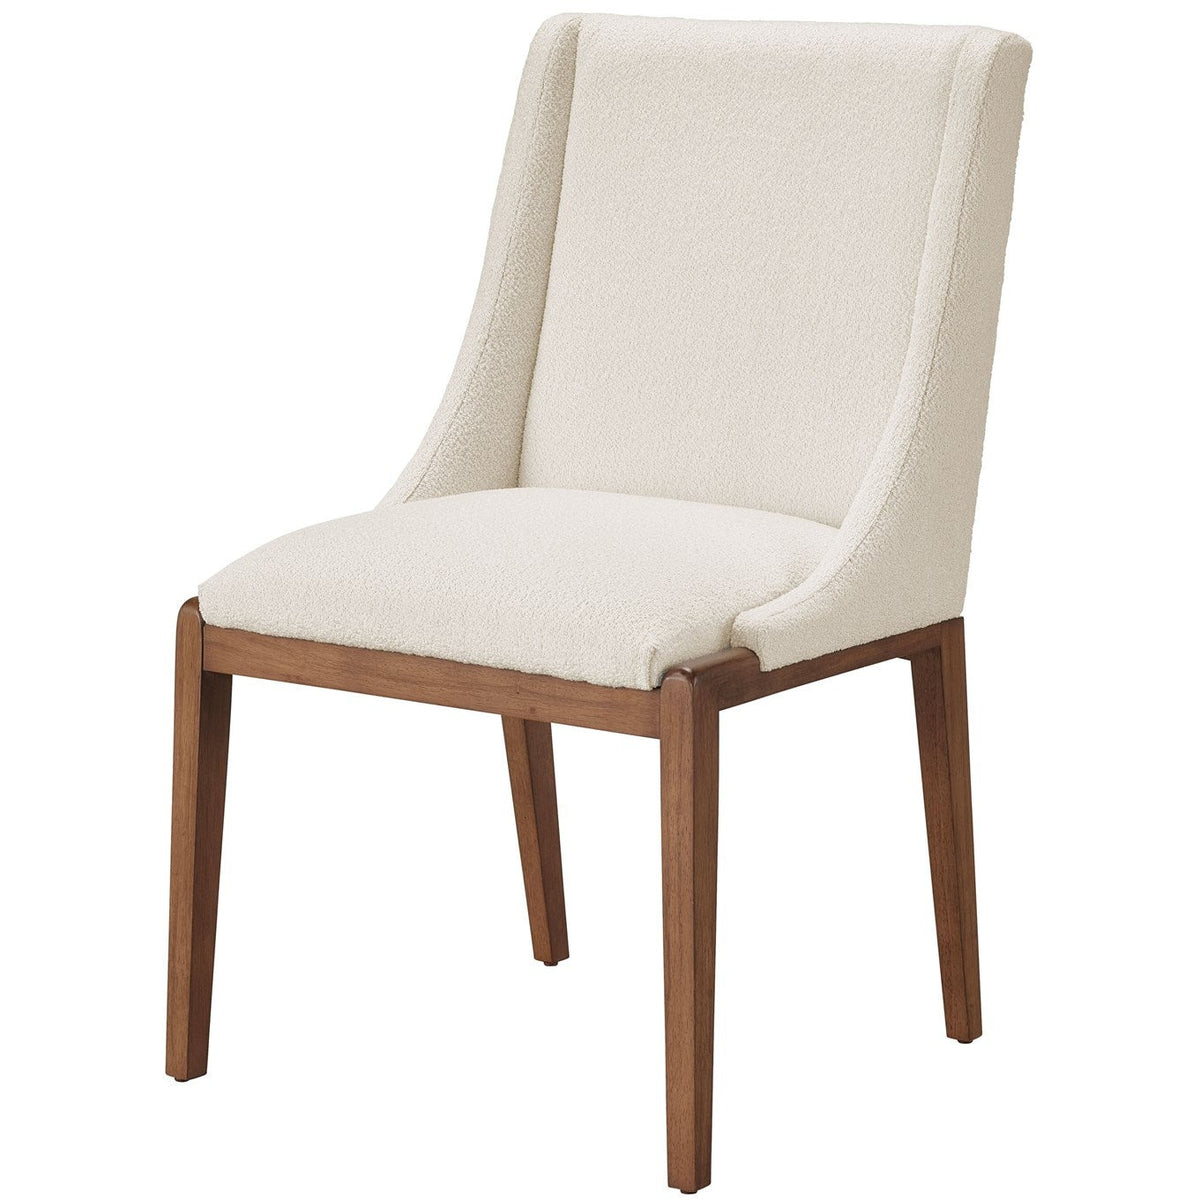 Tranquility Dining Chair - Be Bold Furniture